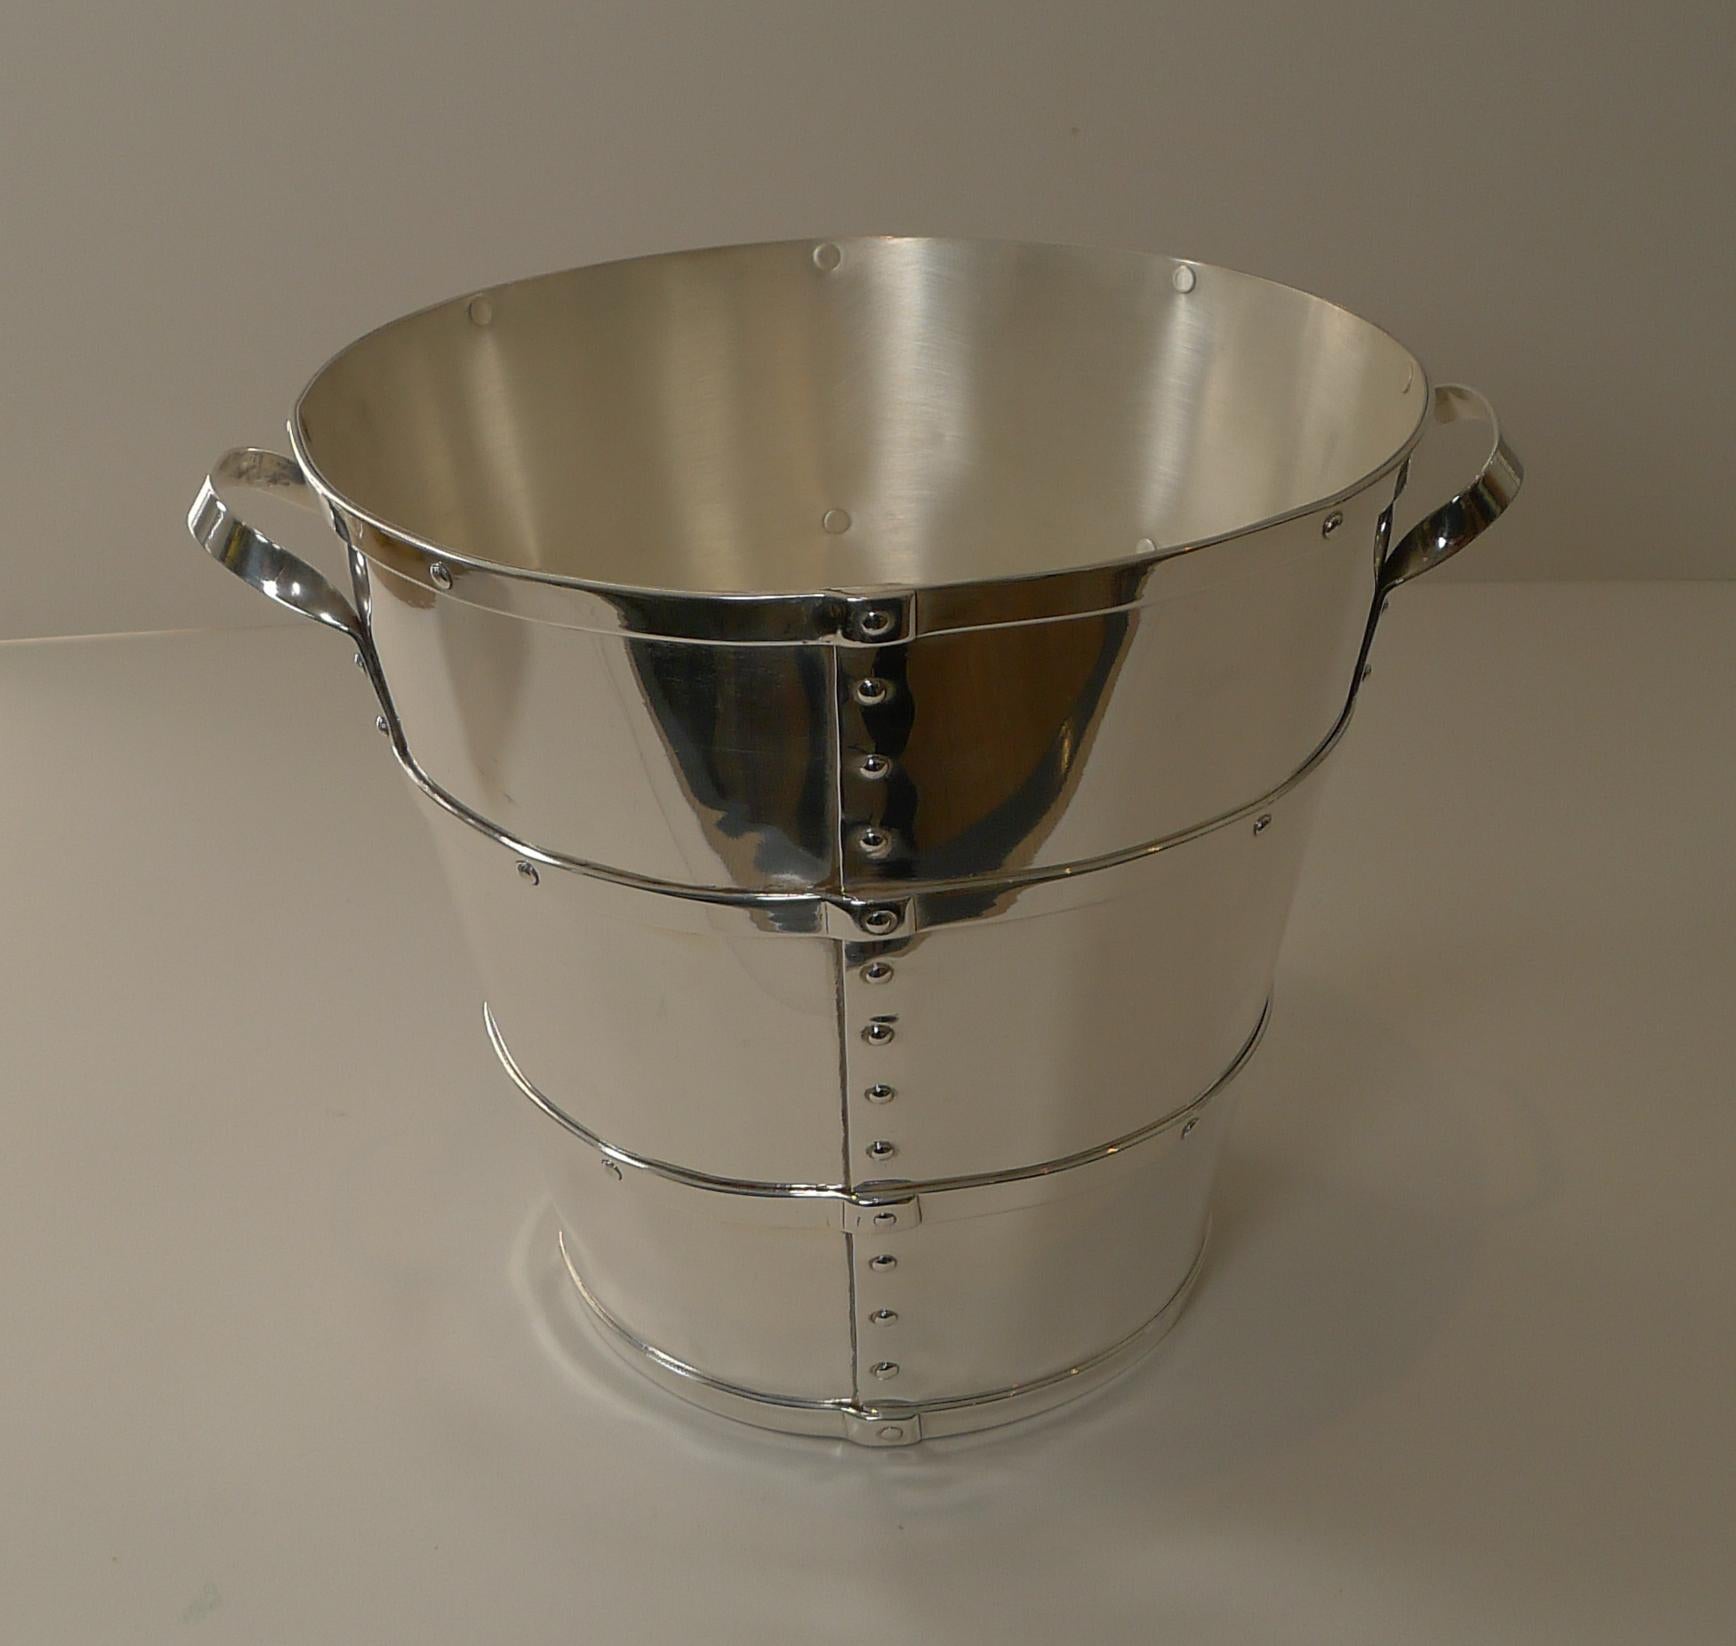 British Unusual Silver Plated Champagne Bucket / Wine Cooler c.1940